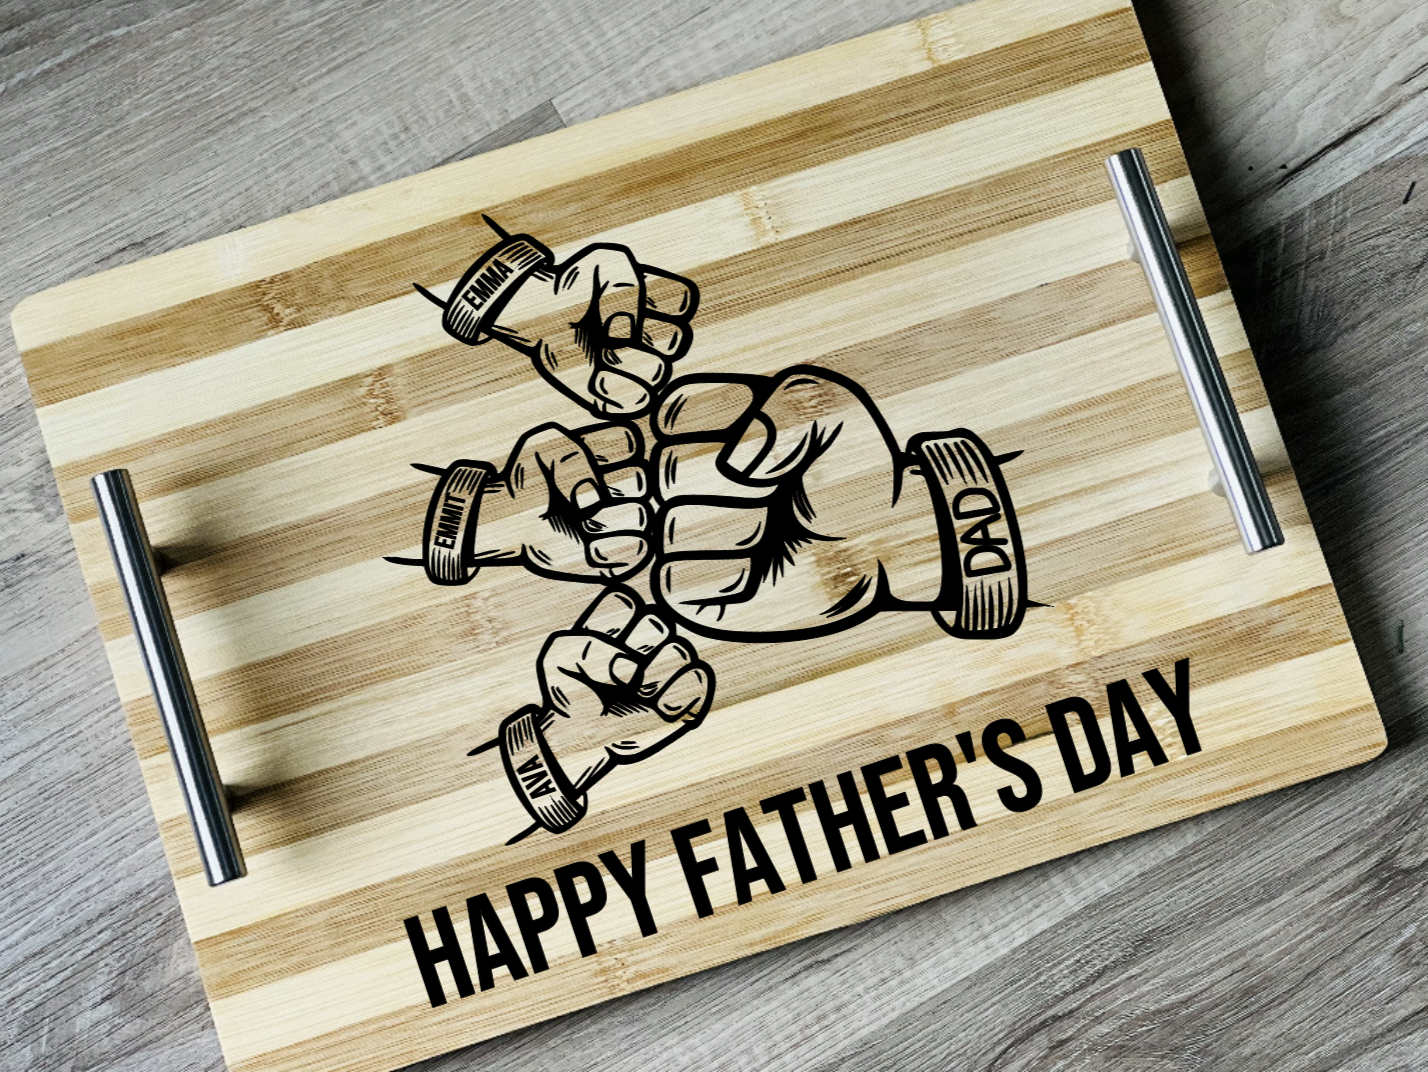 Personalized Dad and Kids Fist pump Bamboo Serving Tray with Silver Handles (1-4 Kids)